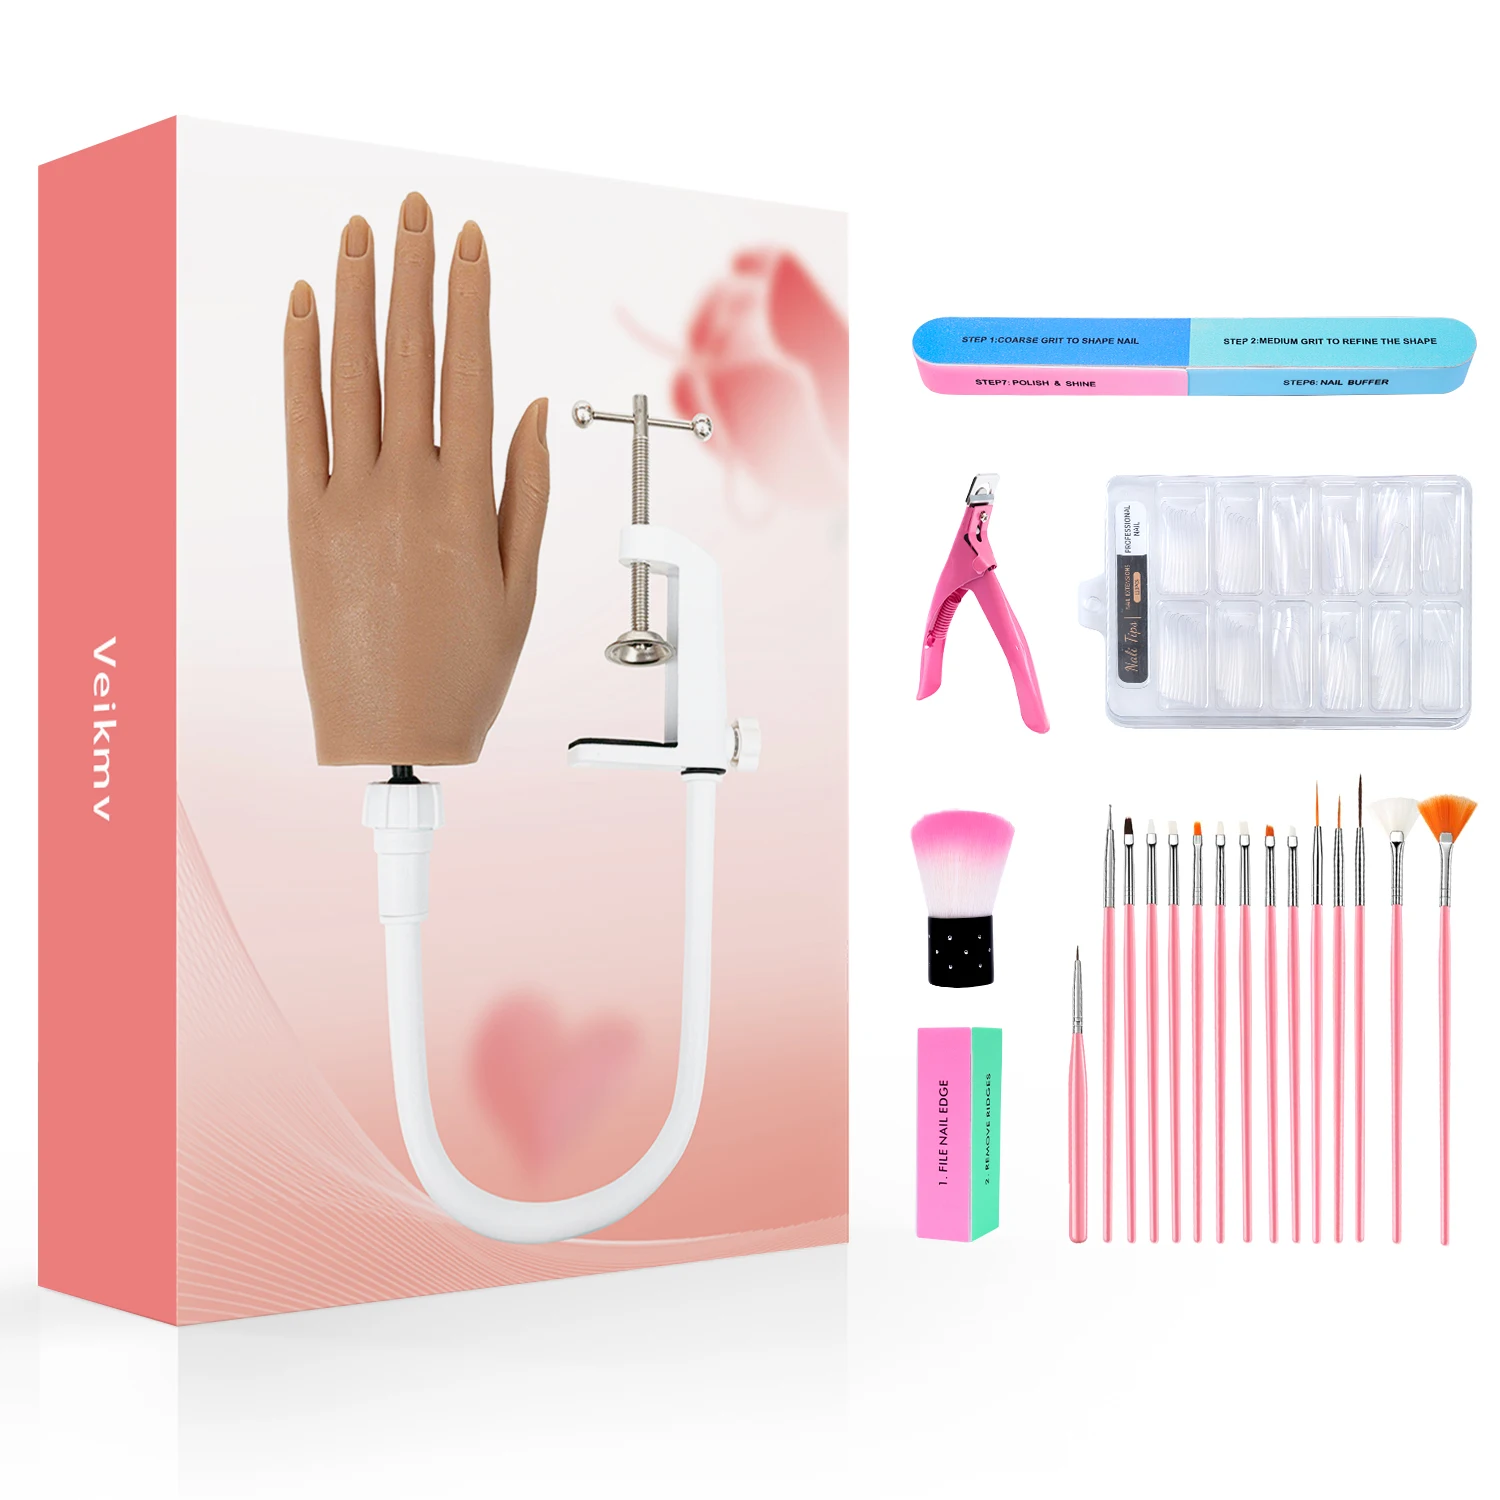 

Veikmv Nail Training Practice Hand For Acrylic Nails Silicone Fake Hands To Nail Practice Hand Model Filming Props